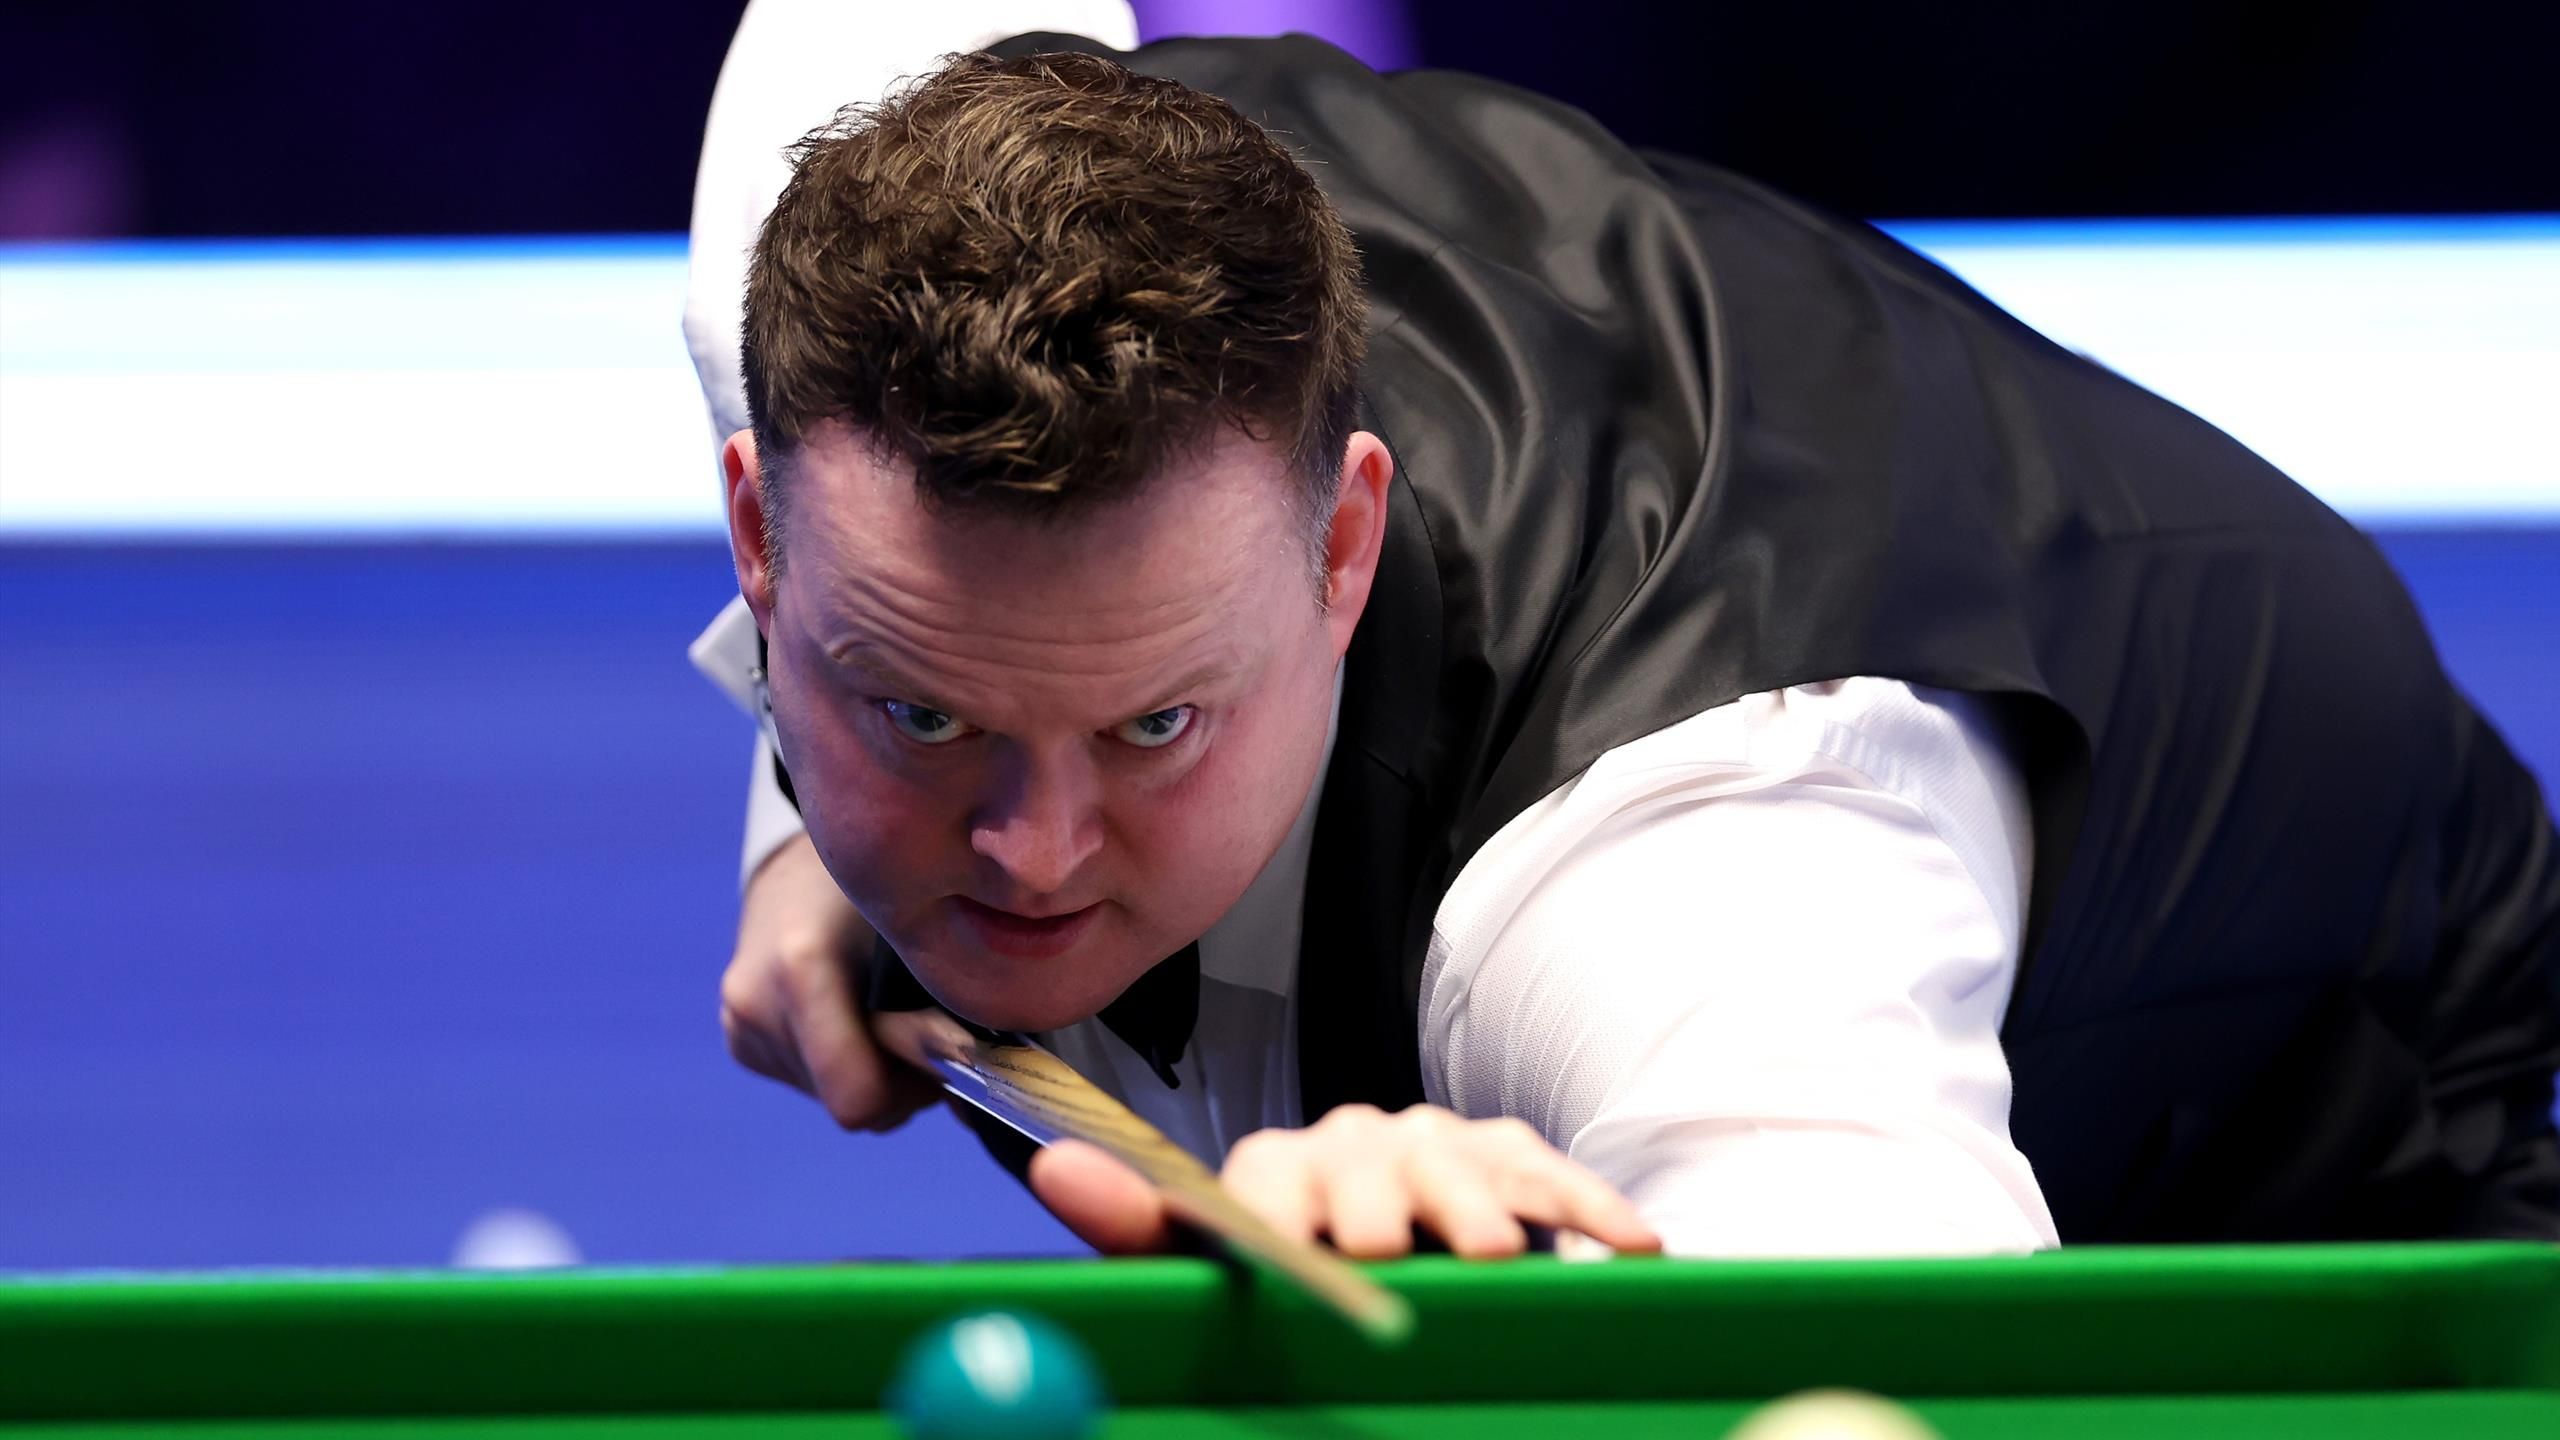 Shaun Murphy Achieves Dominant Victory Over John Higgins in World Grand Prix Snooker, Advances to Last 16